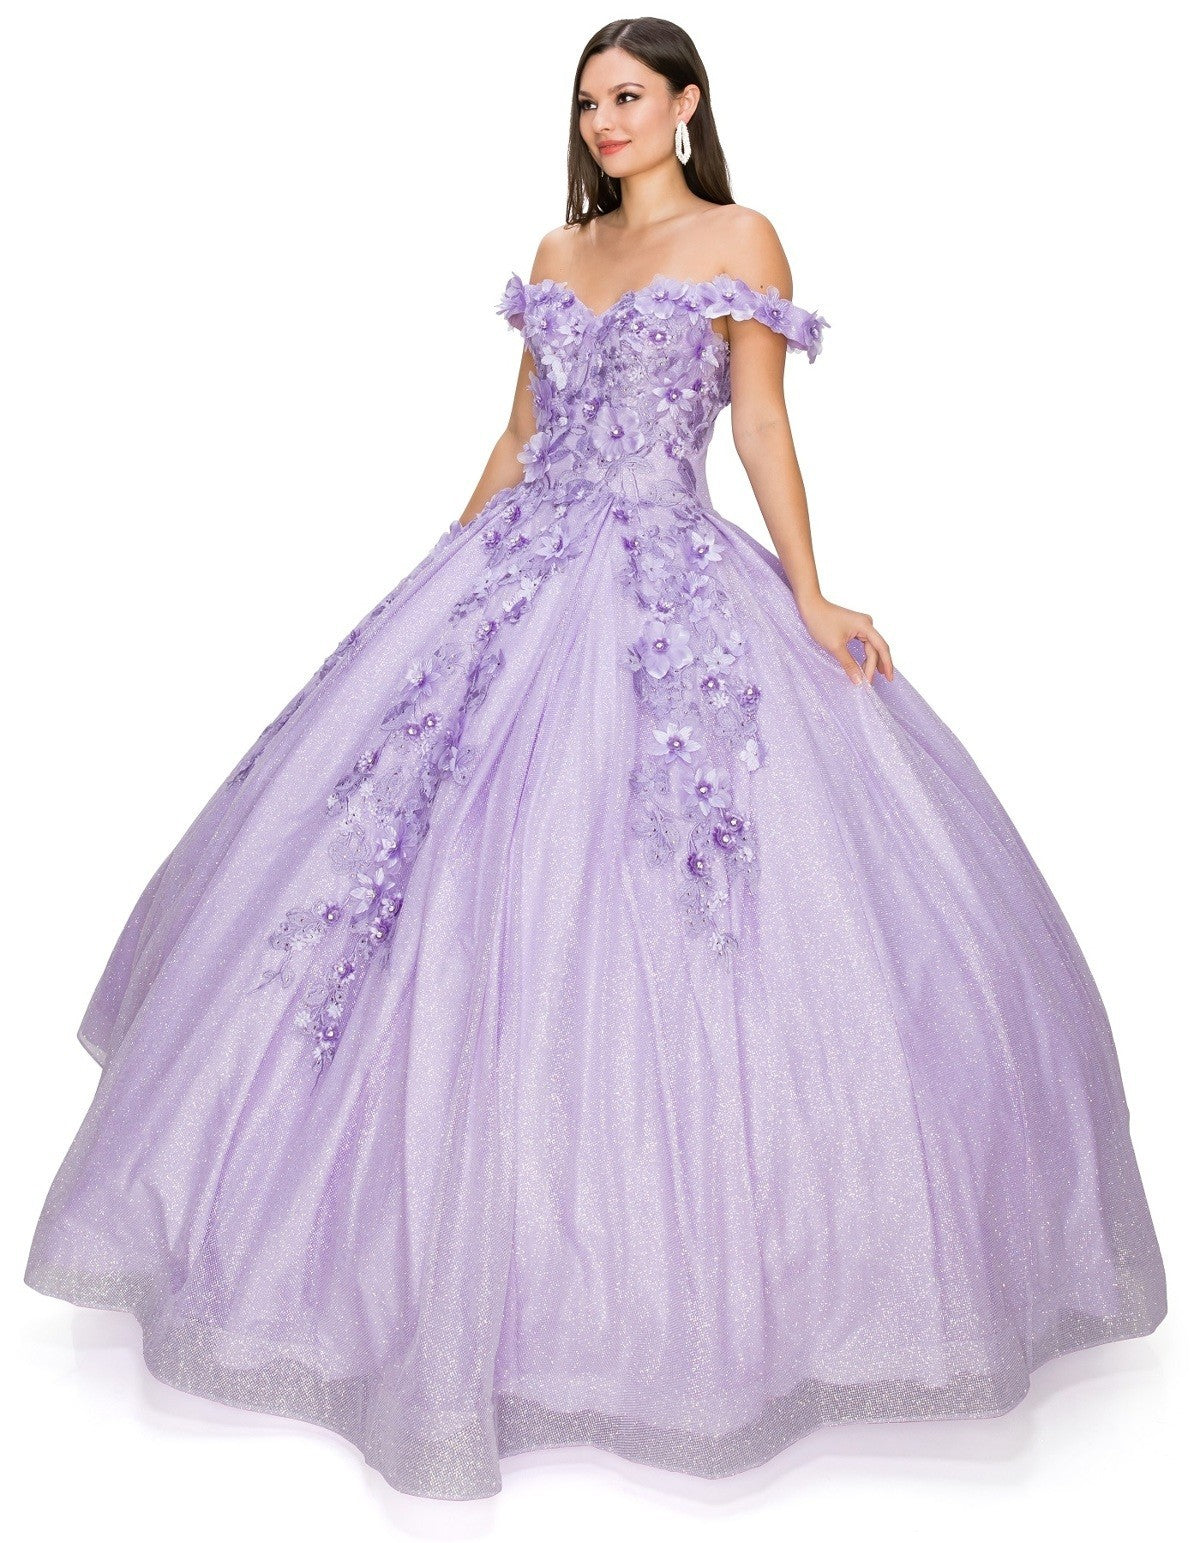 Cinderella Couture USA AS8020J-lilac Sequin Tulle Quinceanera Dress